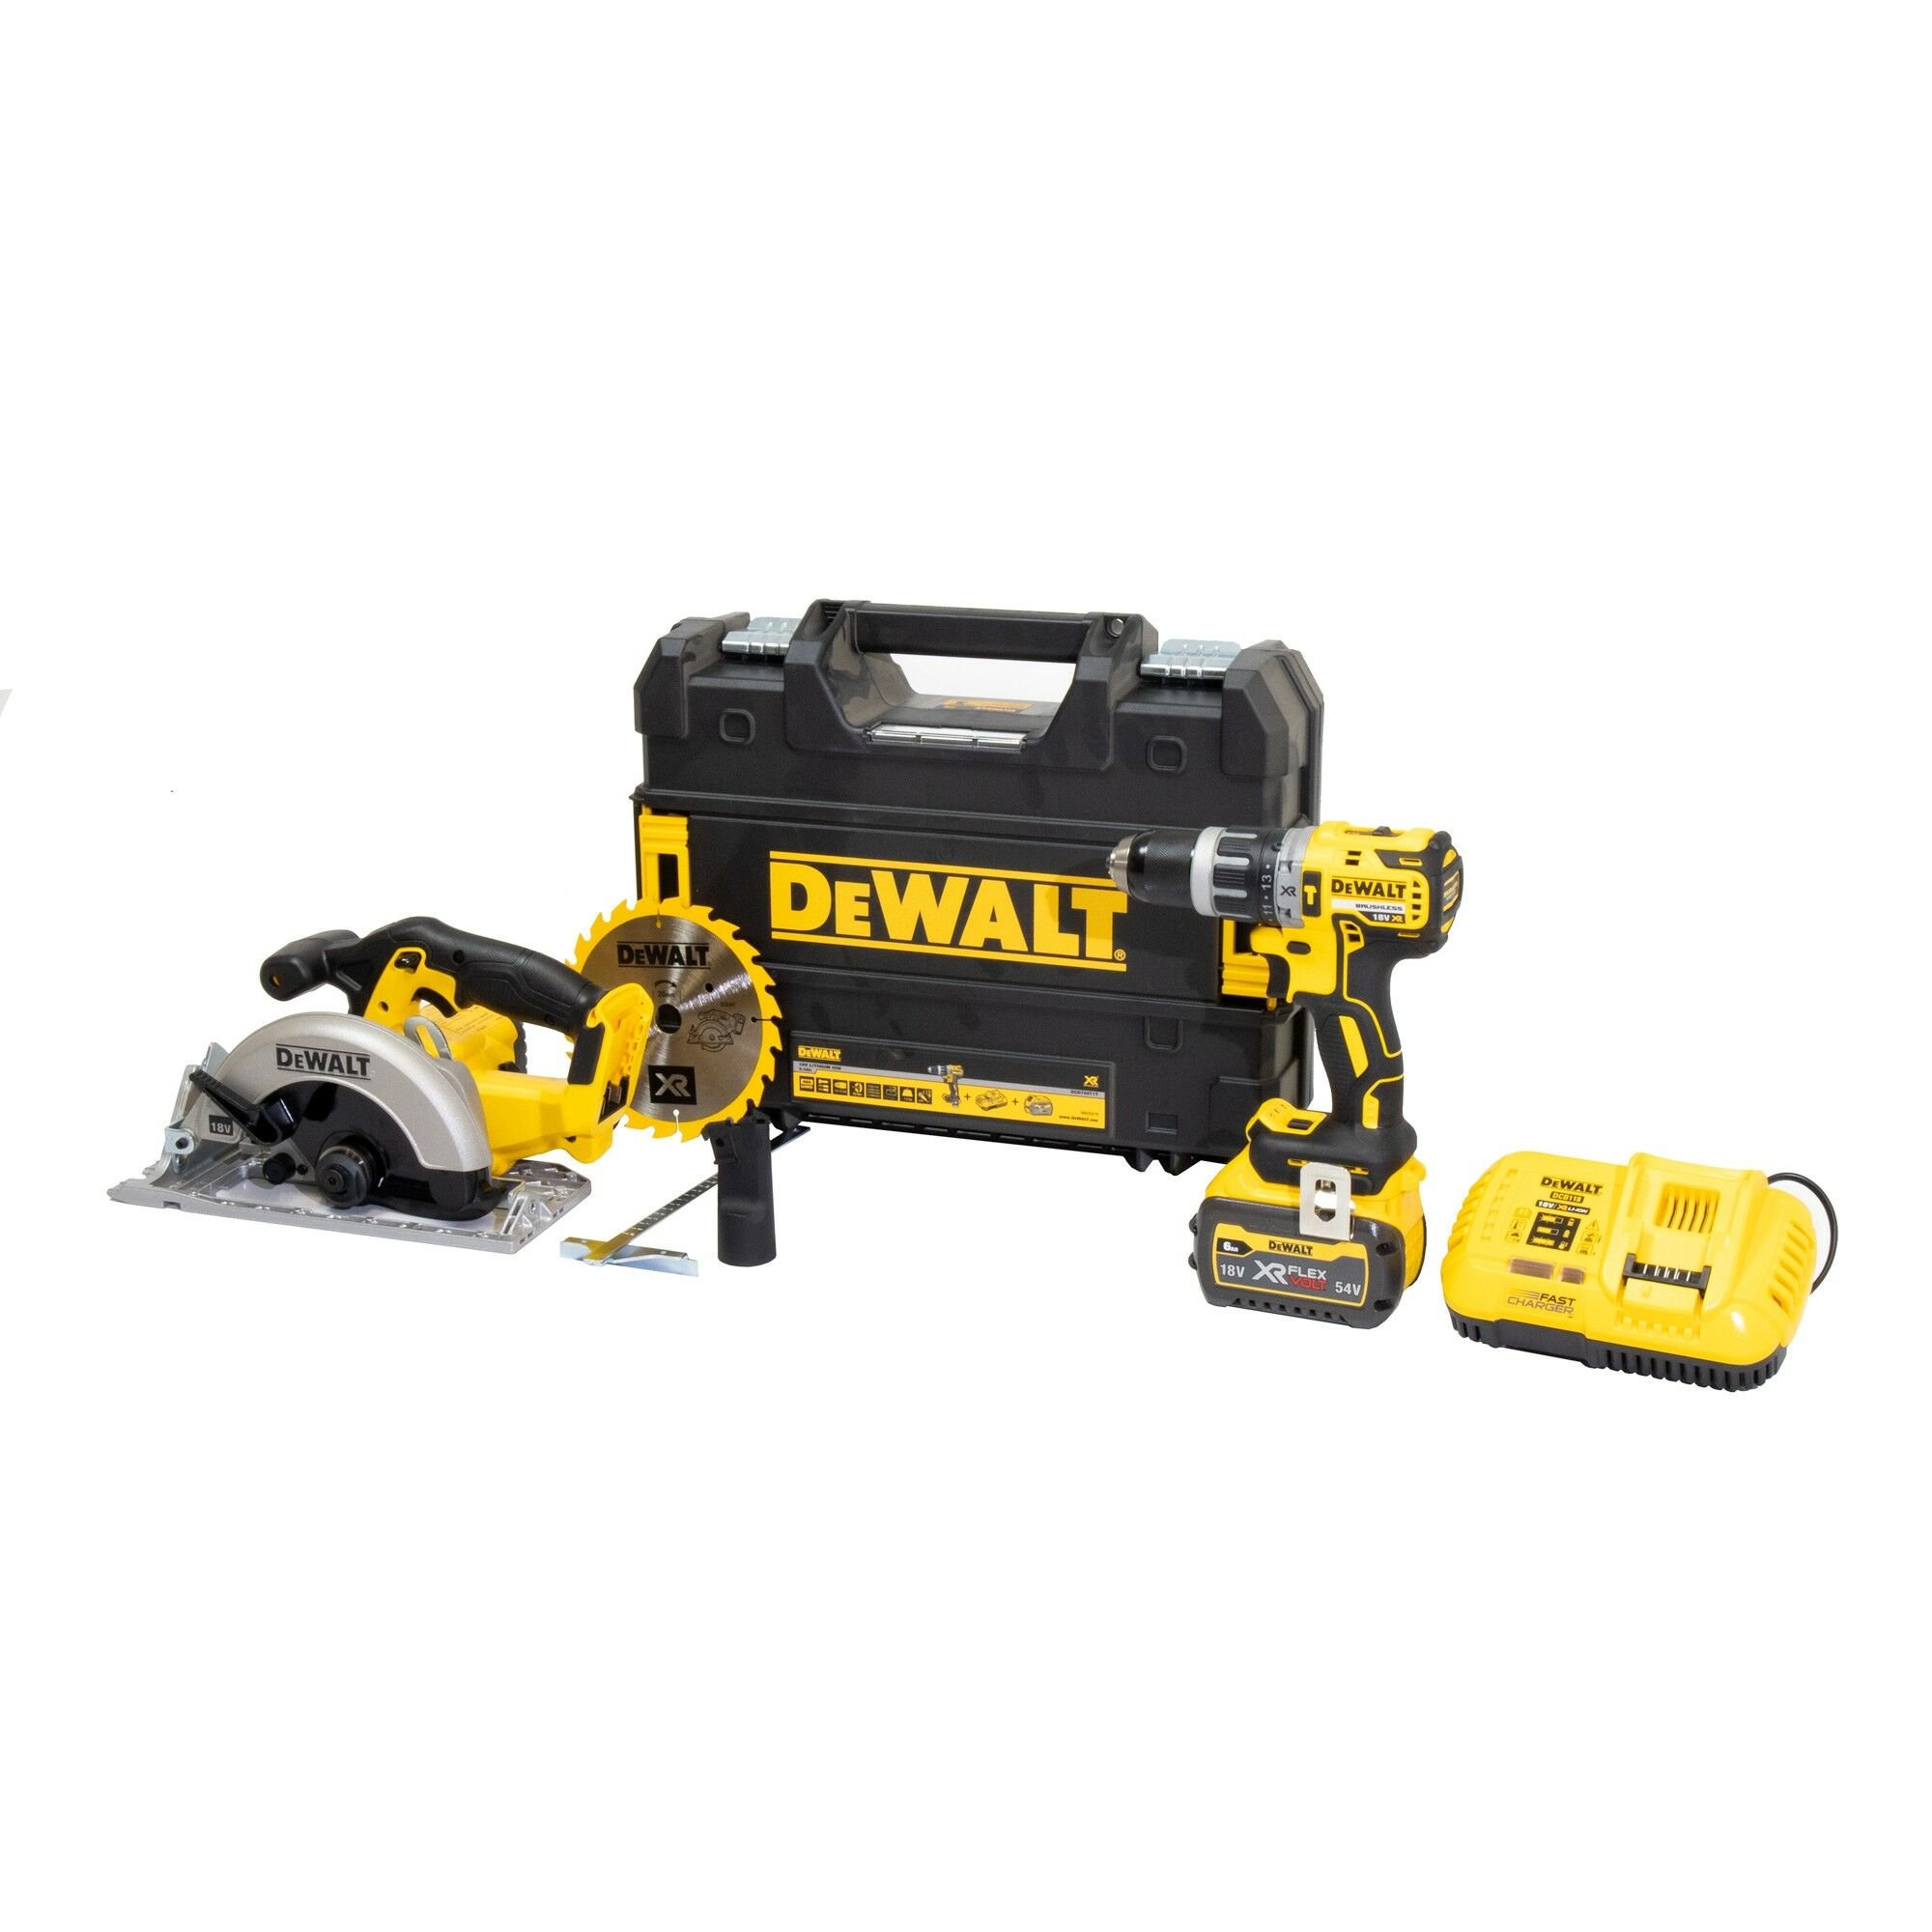 DeWalt DCD796T1T-K4 18V Combi Drill and Circular Saw Kit - 6Ah Battery, Charger and Case